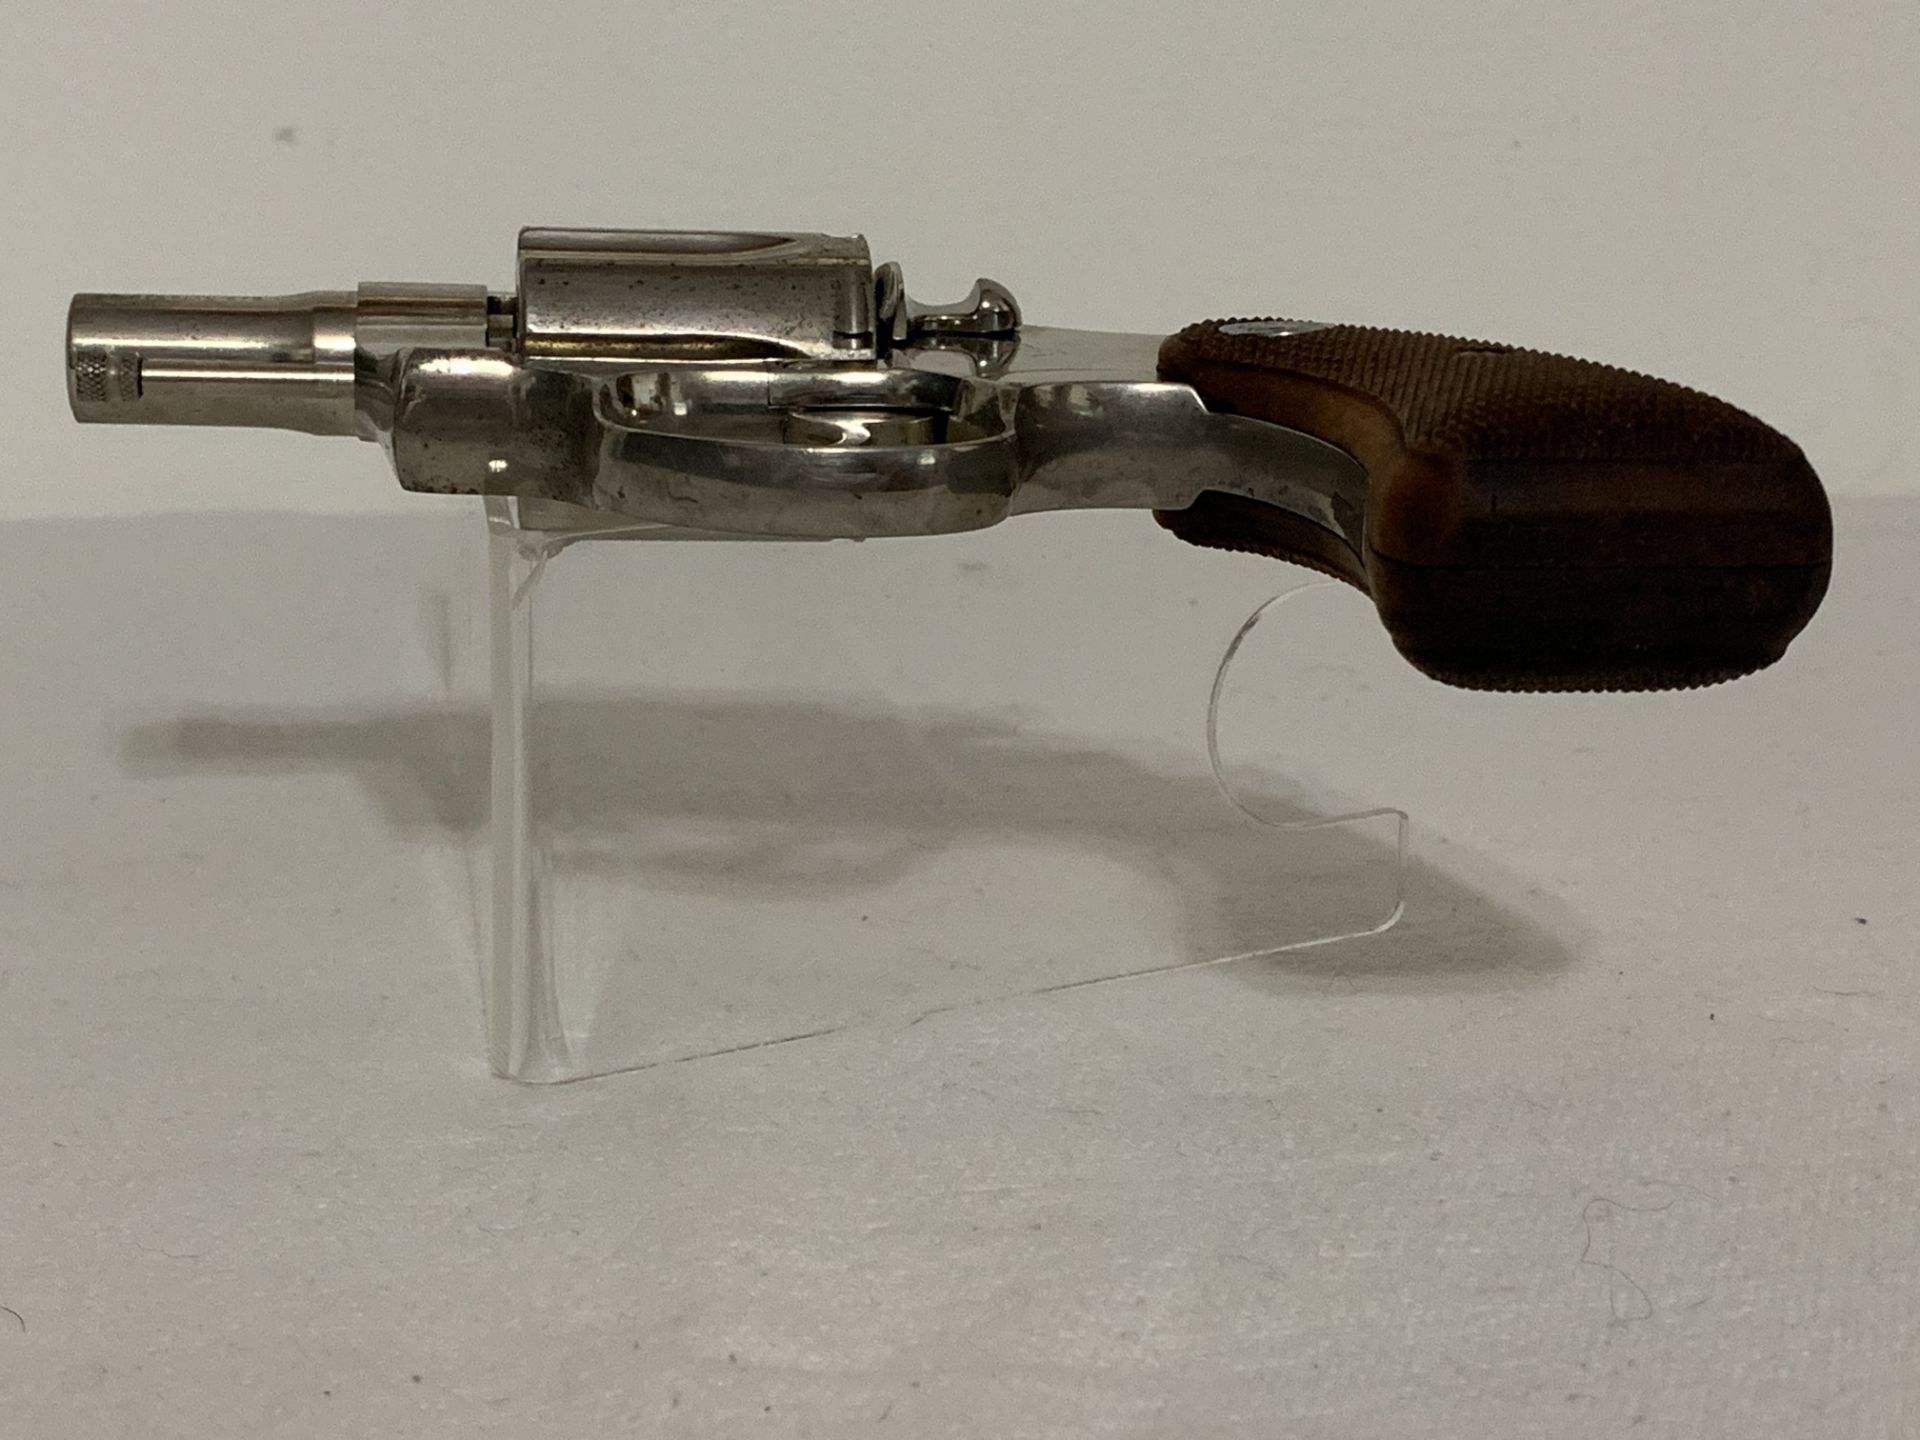 COLT DETECTIVE SPECIAL PISTOL - 38 CAL - NICKEL - WITH ORIGINAL 1971 GRIPS (FOB HOLLYWOOD, FL) - Image 8 of 11